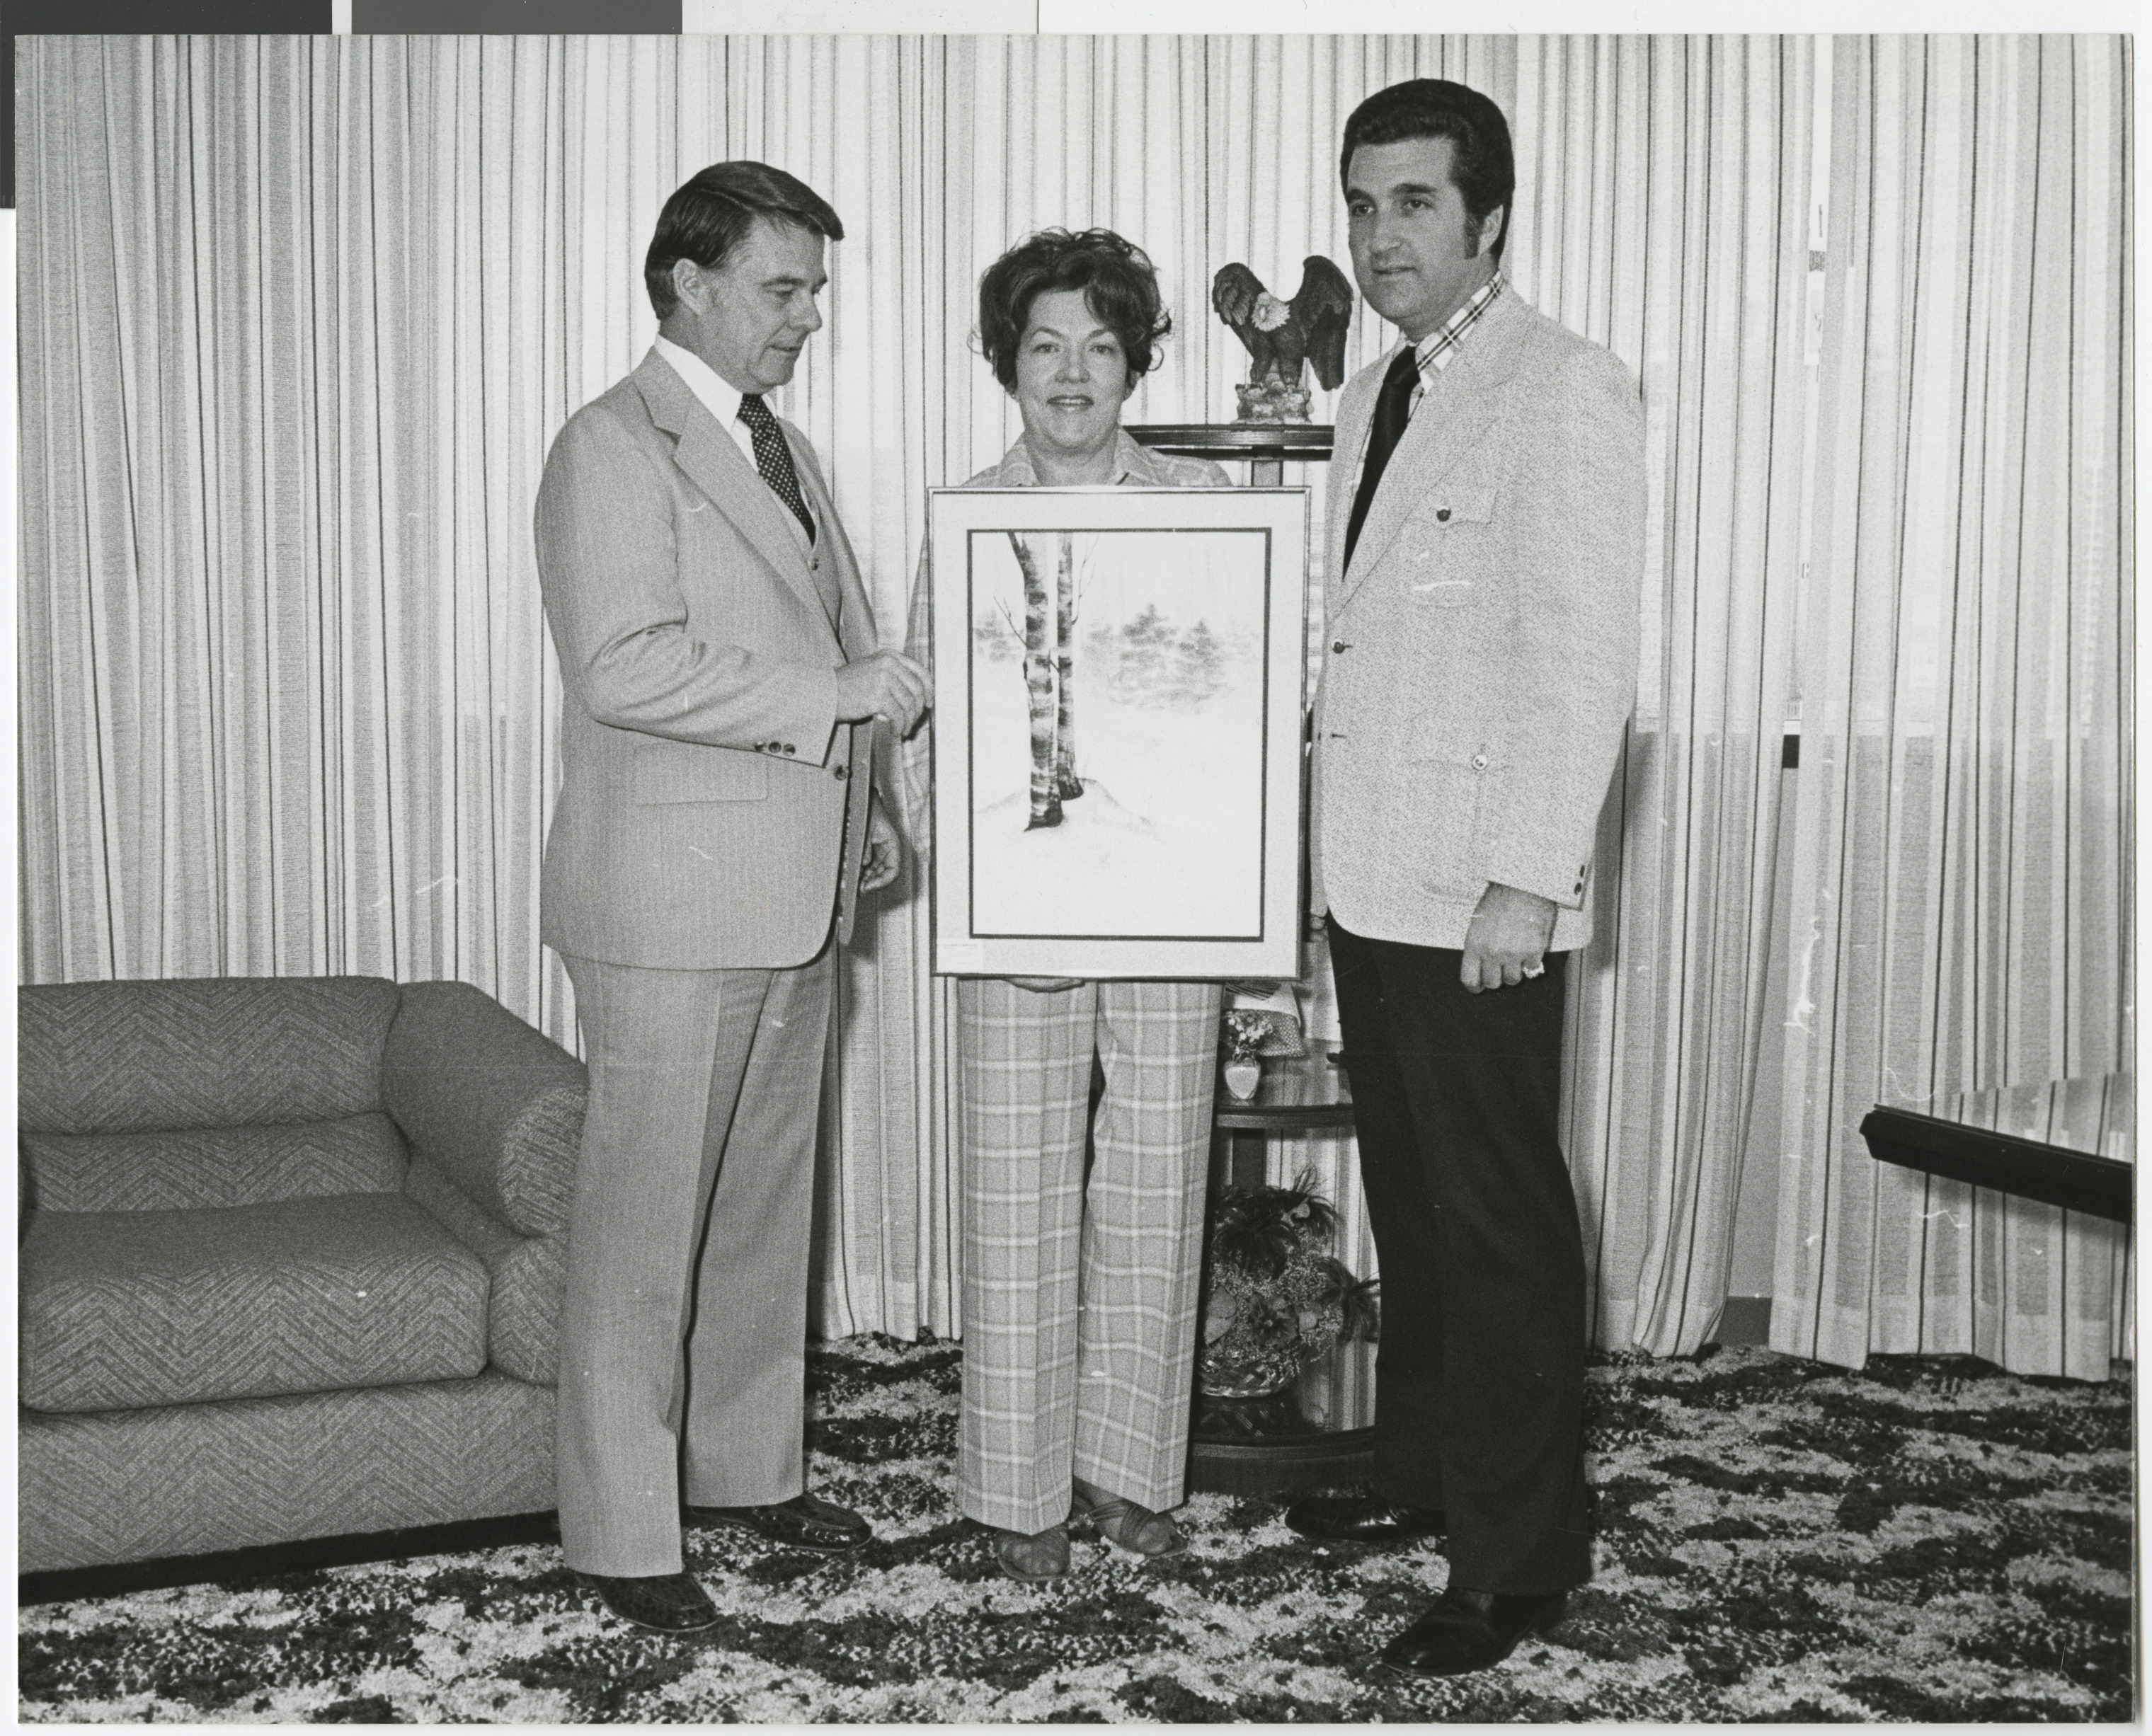 Photograph of Ron Lurie (right) with Bill Briare and M. Hendricks with a painting, April 4, 1977